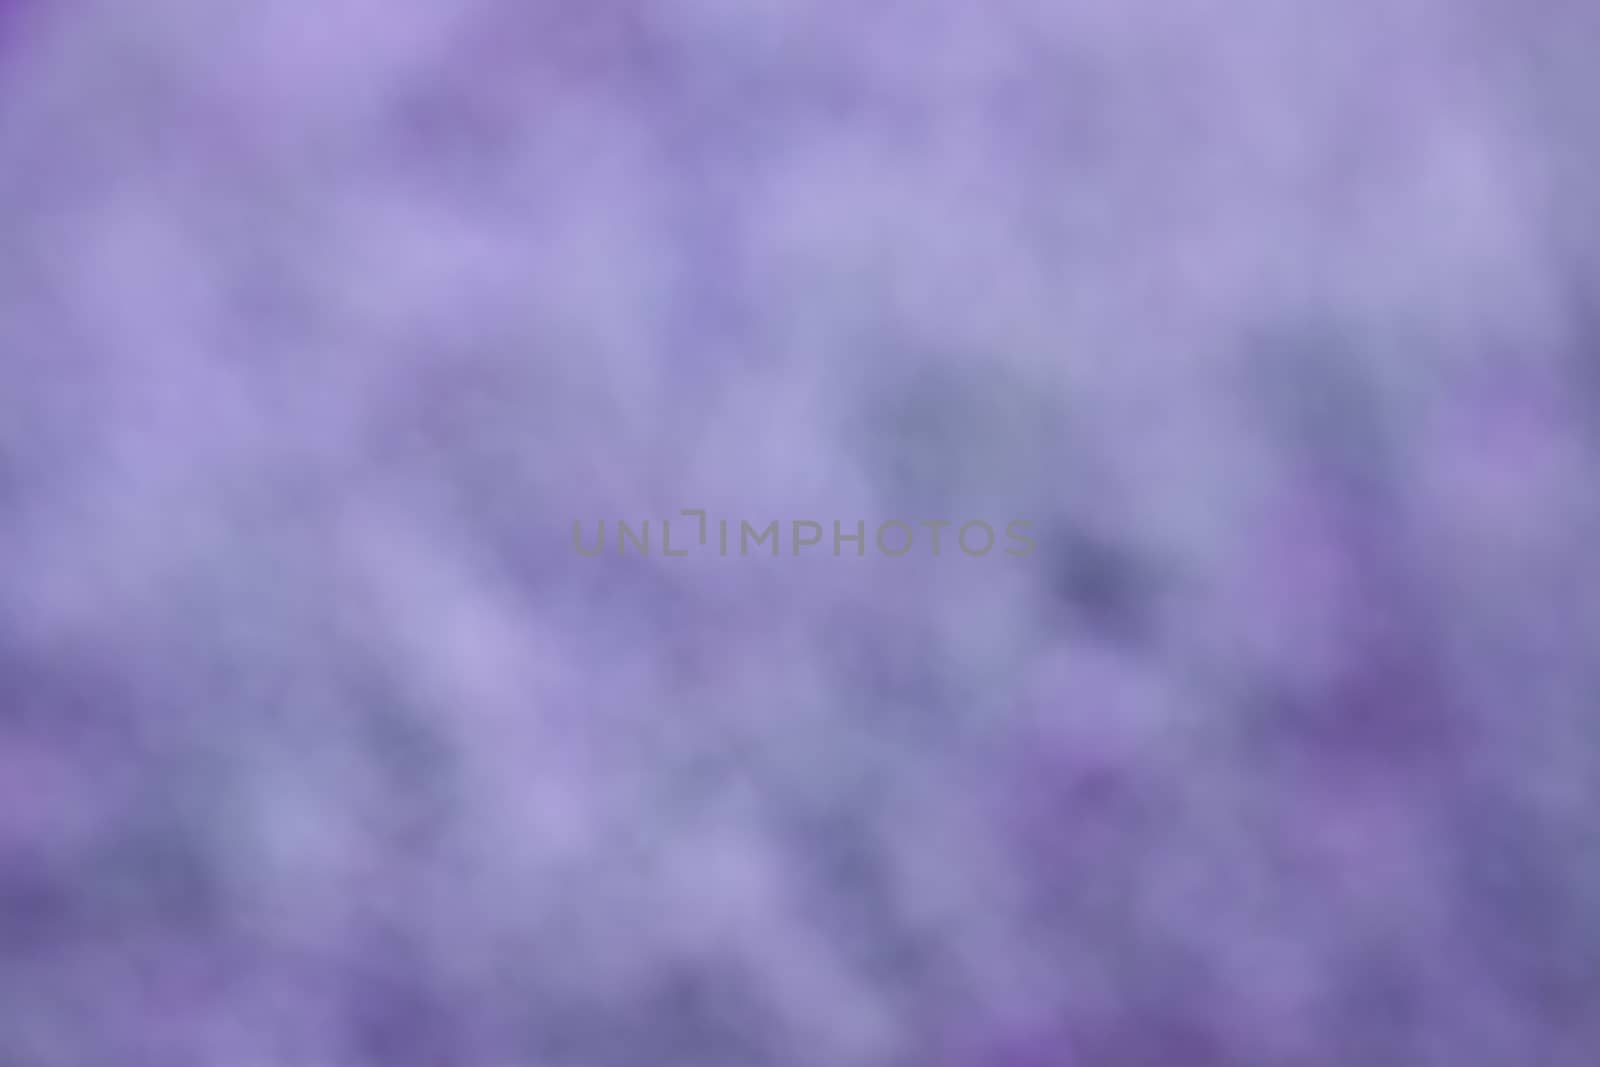 Abstract purple background or gold Christmas background with bright center spotlight, vintage grunge background texture